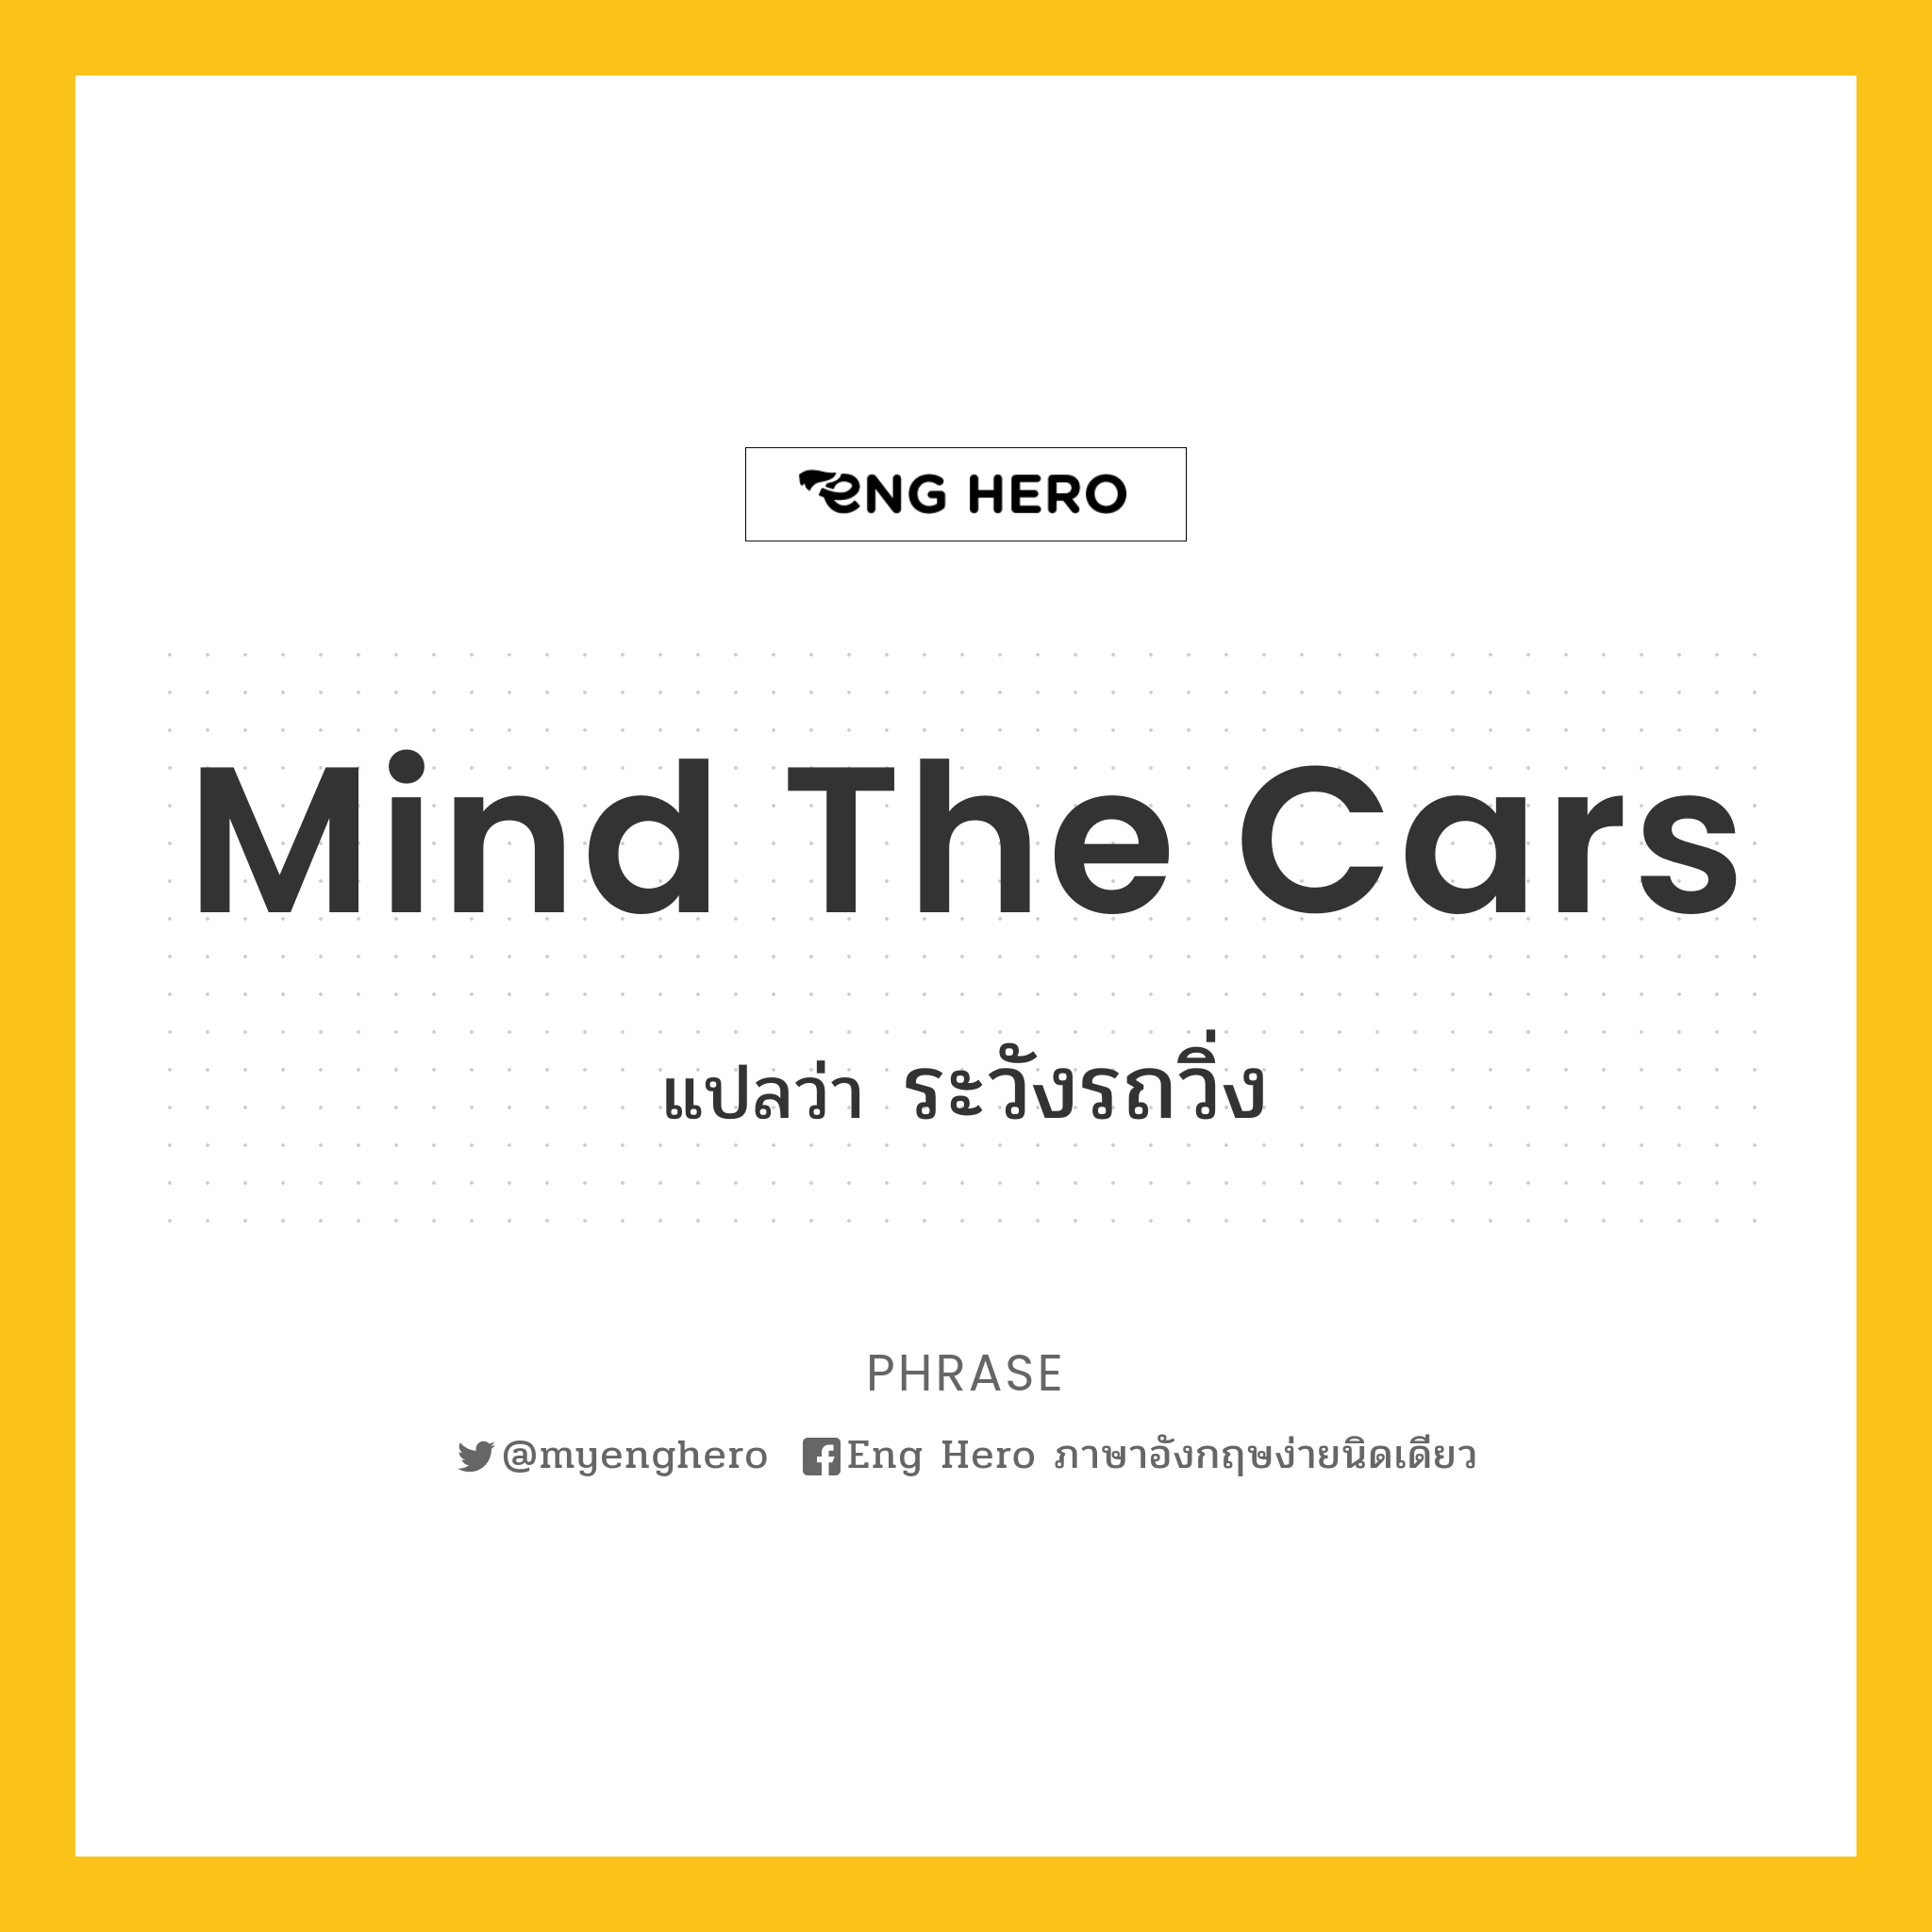 Mind the cars